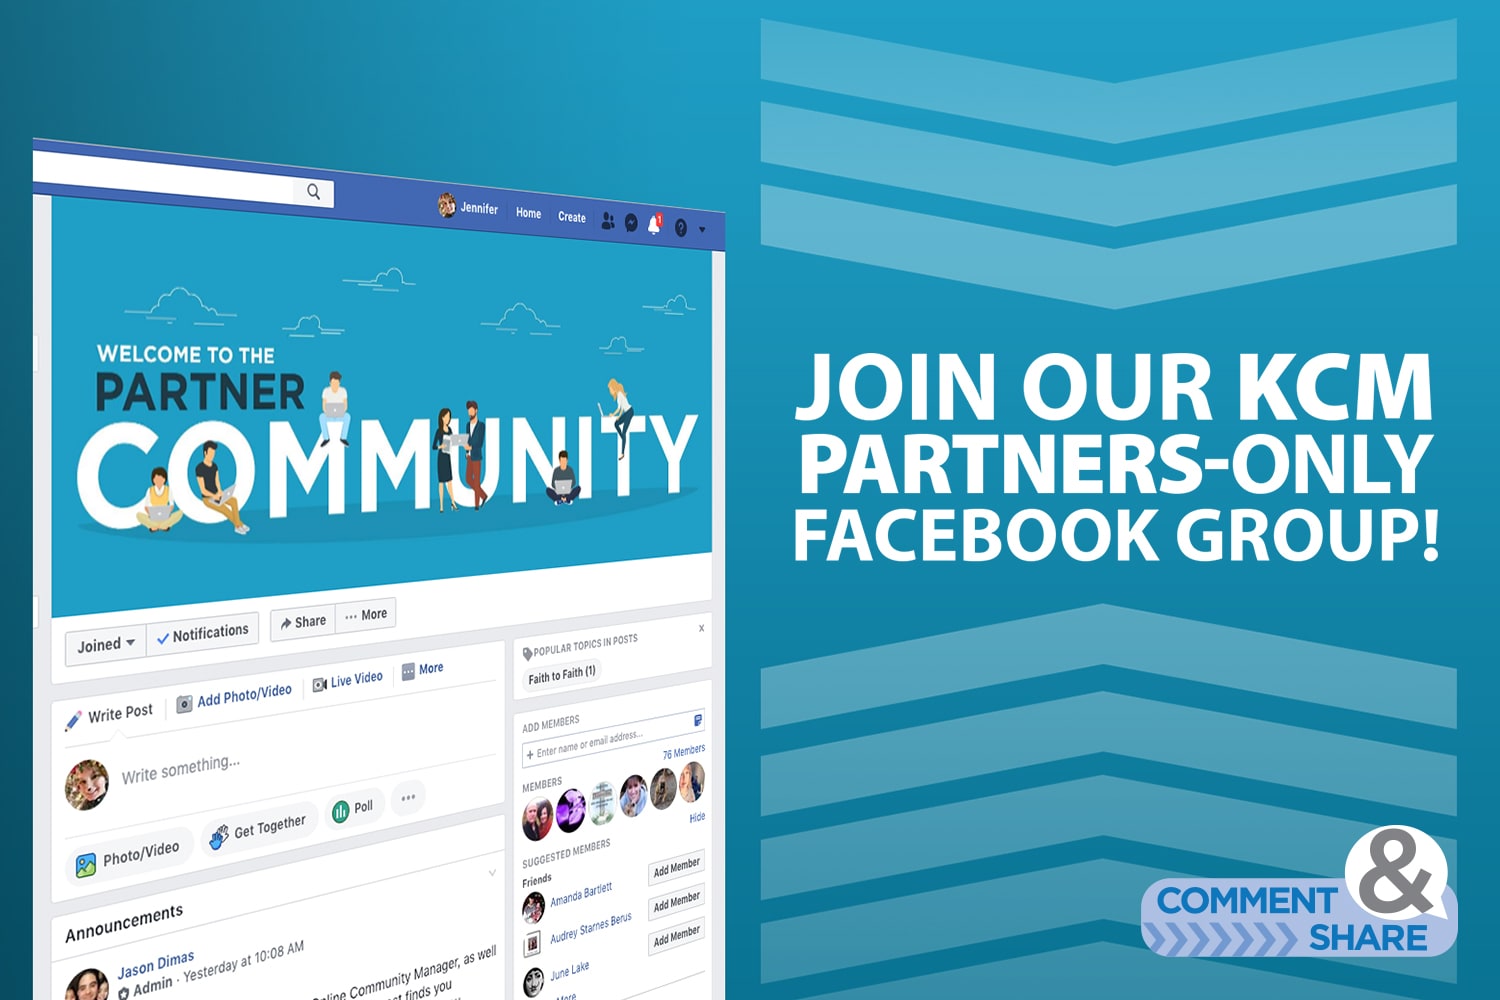 KCM Partners-Only Facebook group